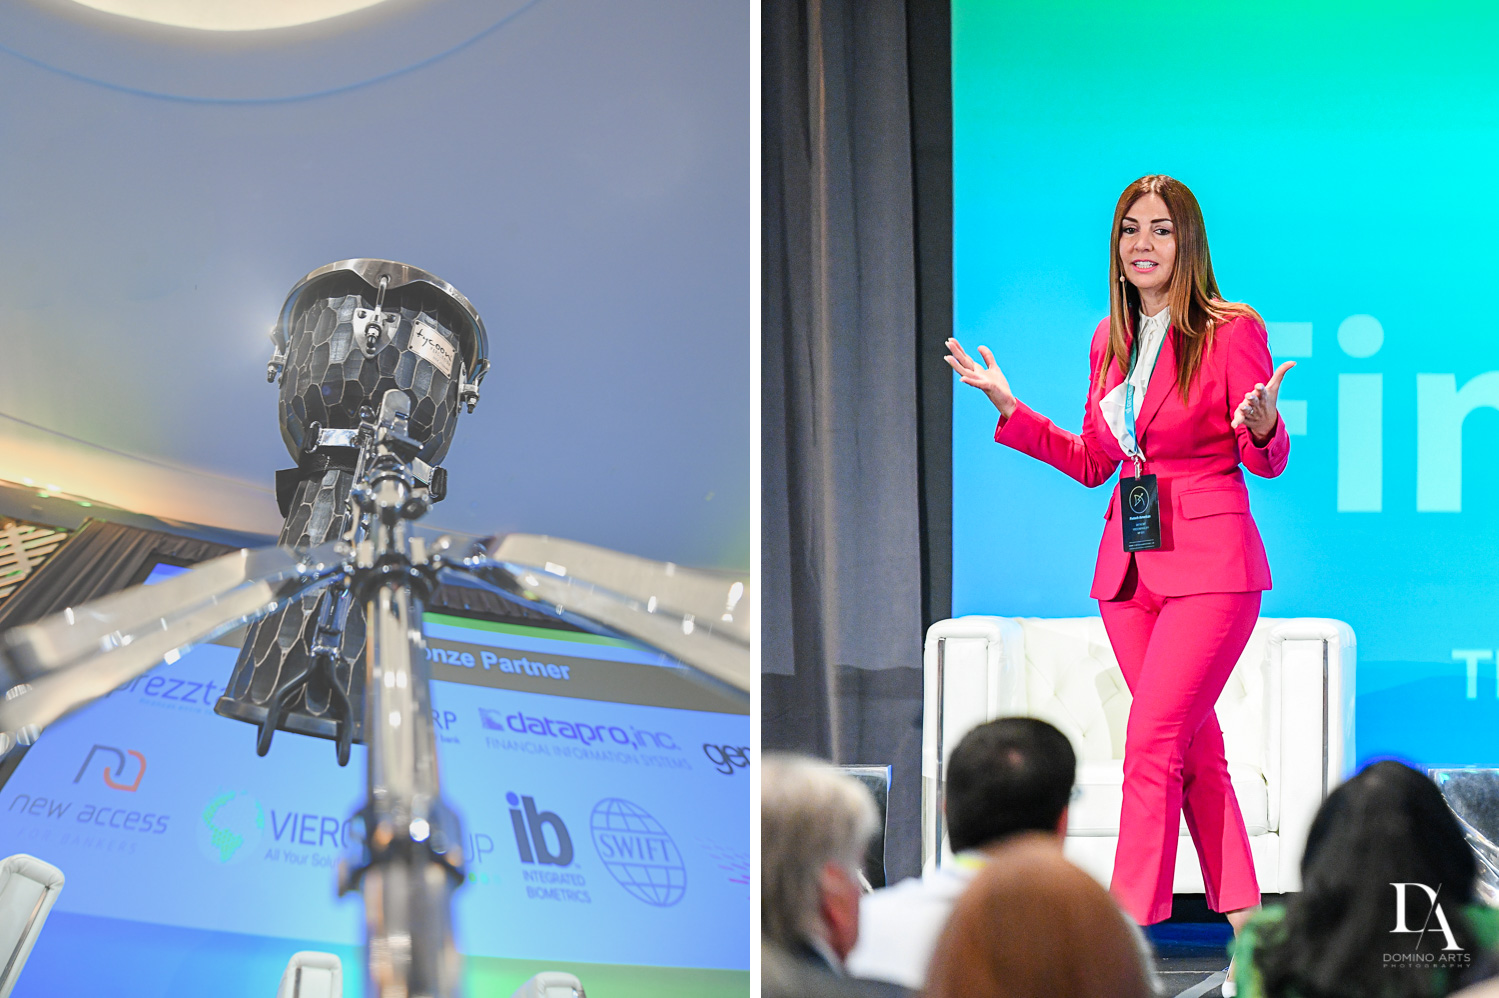 Corporate Event Conference Photography of Fintech Americas at Fontainebleau Miami Beach Florida